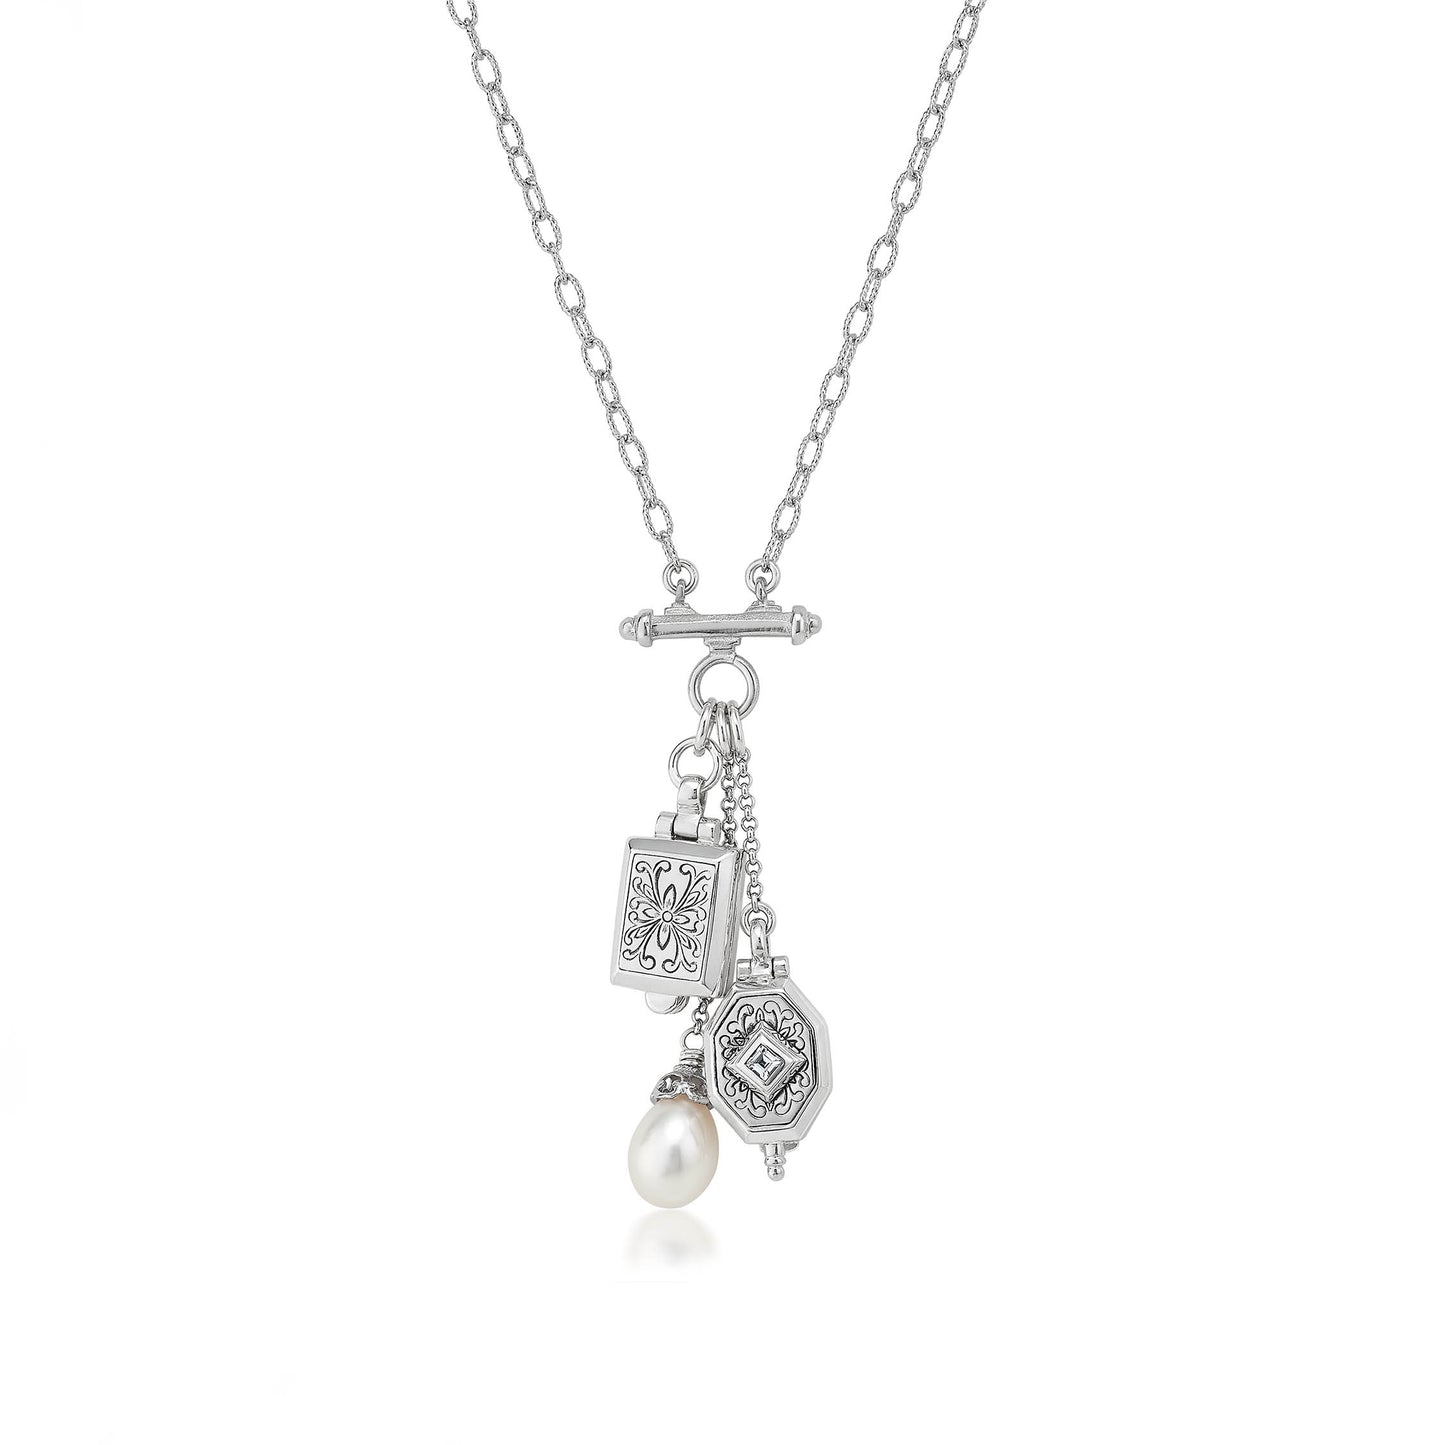 Anatoli Collection Sterling Silver Double Locket Charm Necklace